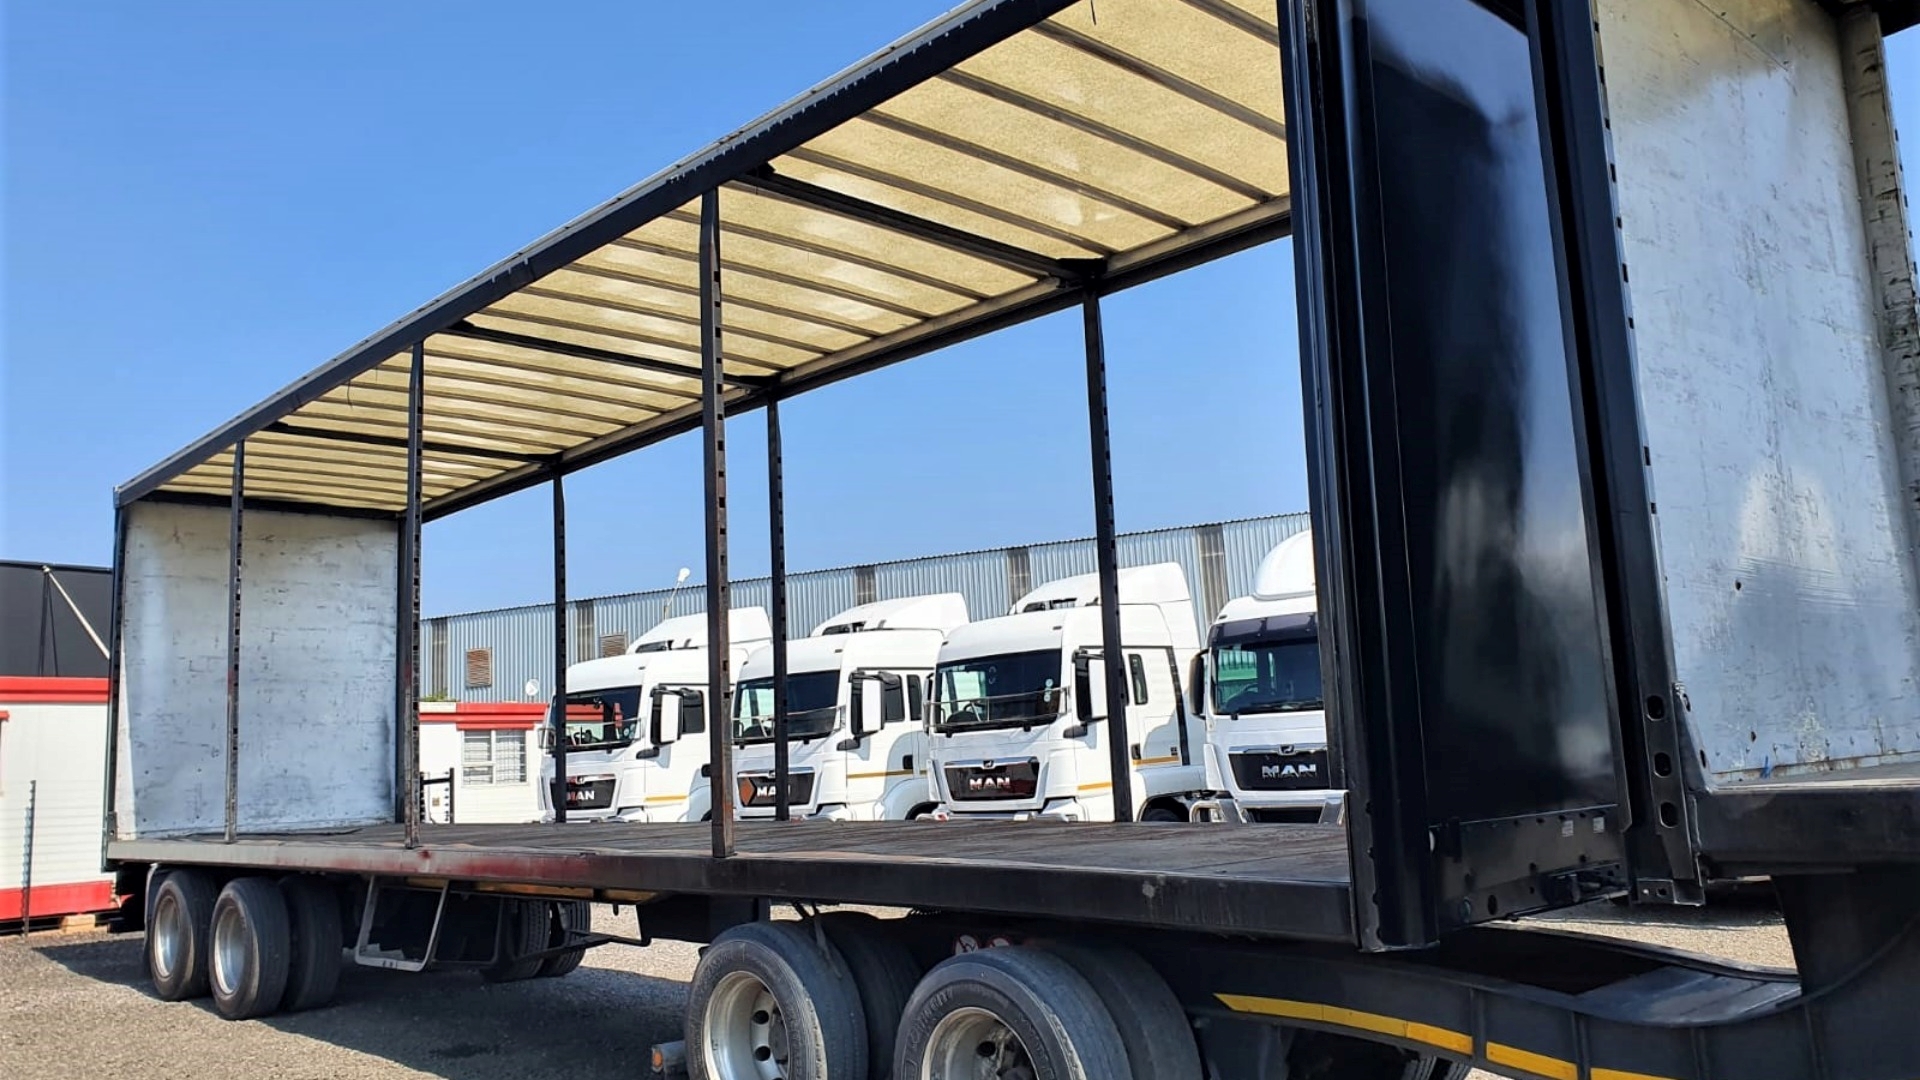 SA Truck Bodies Trailers Tautliner SUPERLINK  SA TRUCK BODIES VOLUMAX TAUTLINER 2019 for sale by ZA Trucks and Trailers Sales | Truck & Trailer Marketplace